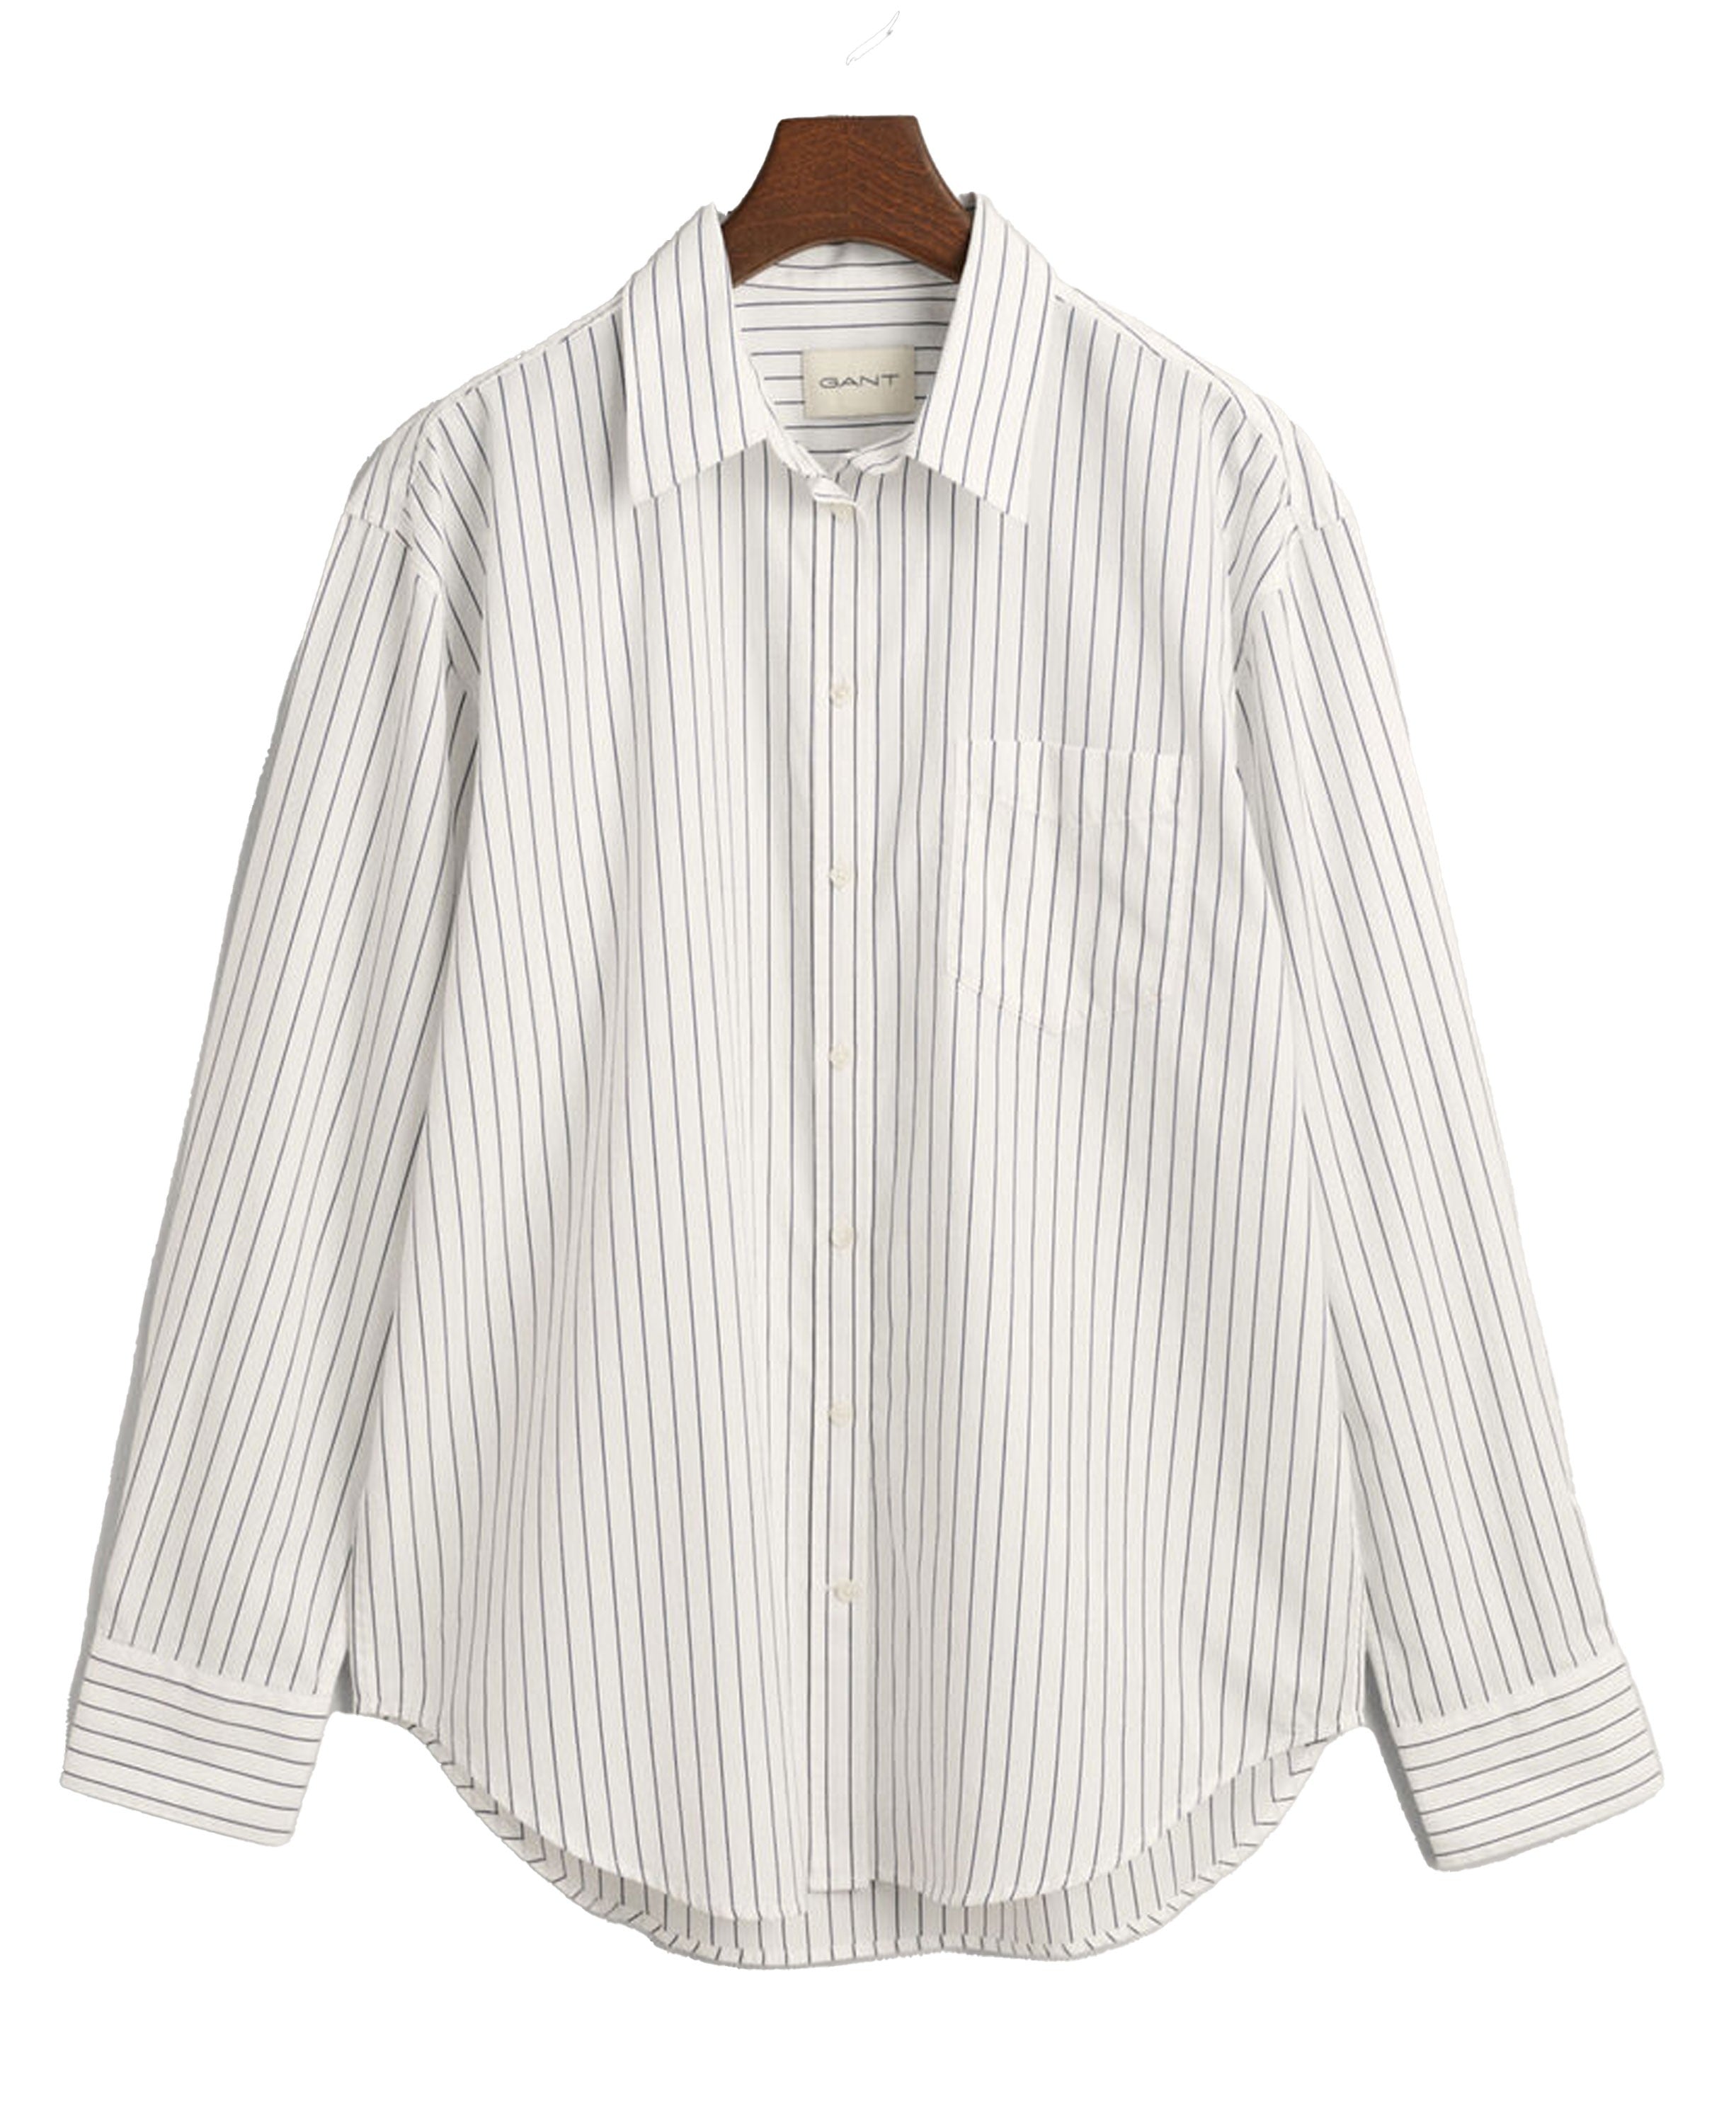 Relaxed Fit Striped Poplin Shirt - White